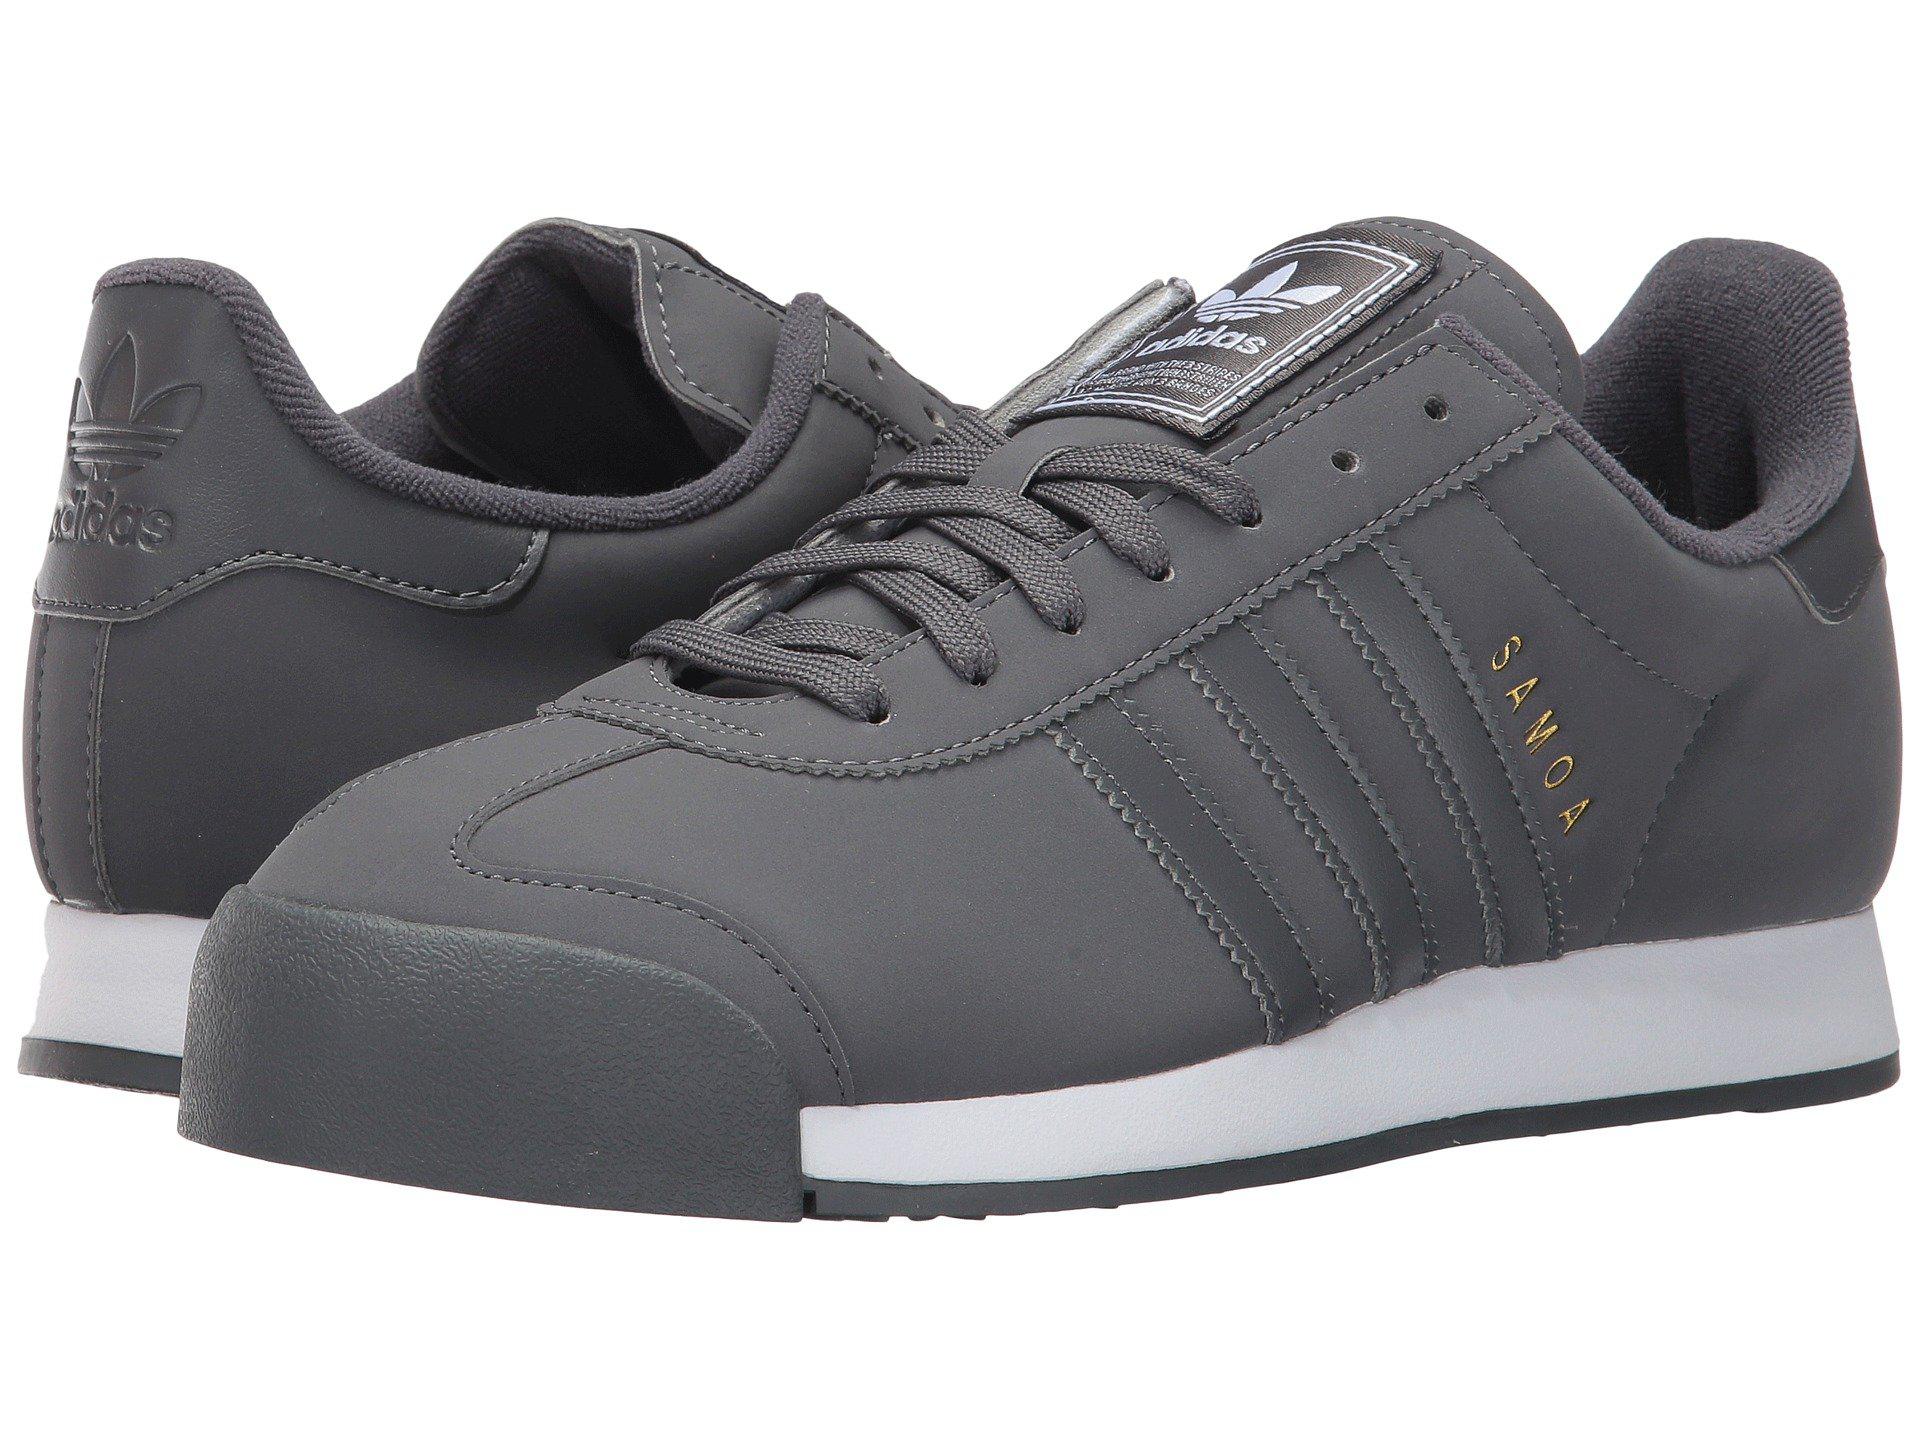 adidas Originals Samoa Leather in Grey 5/White/Gold (Gray) for Men - Lyst